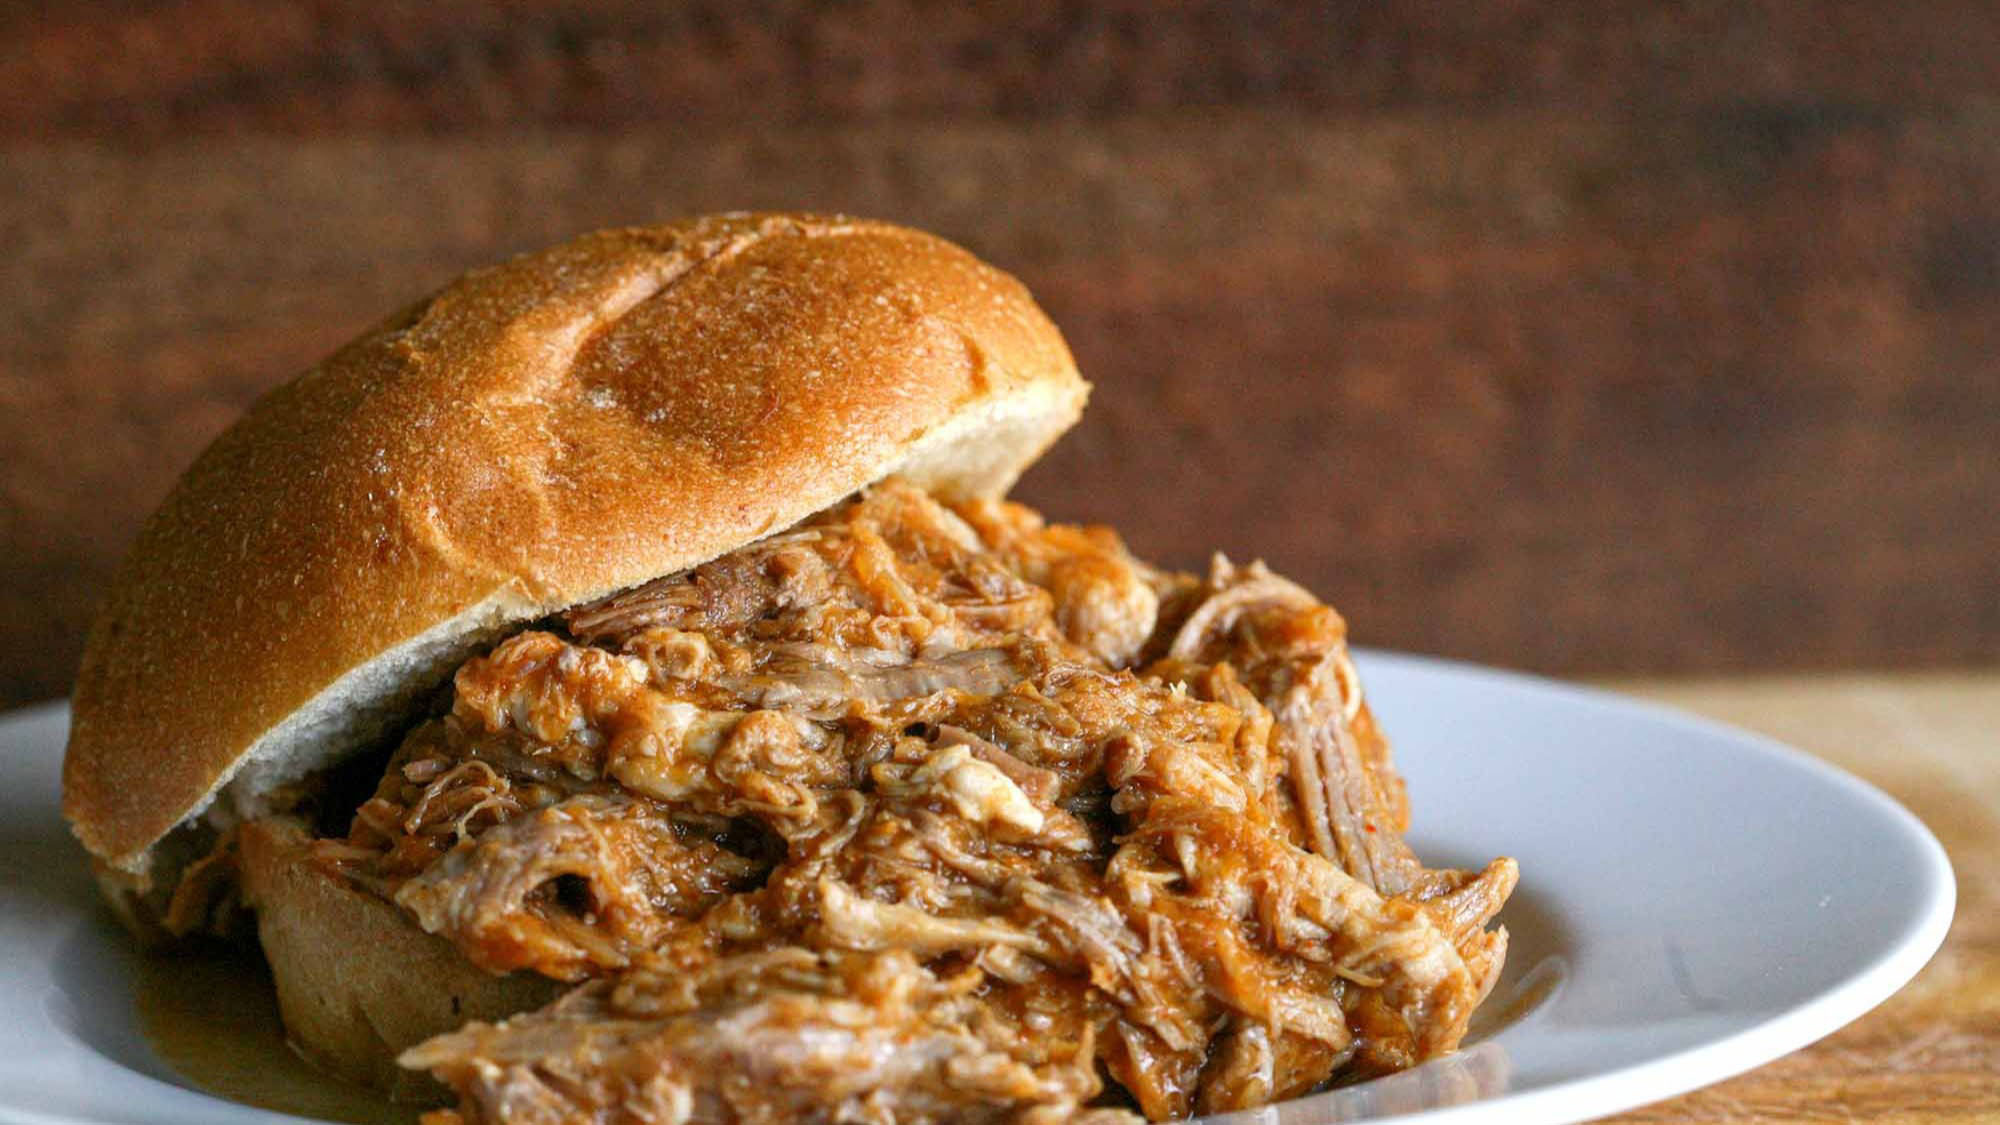 Pulled pork is an American barbecue dish, more specifically a dish of the Southern U.S., based on shredded barbecued pork shoulder. It is typically sl...